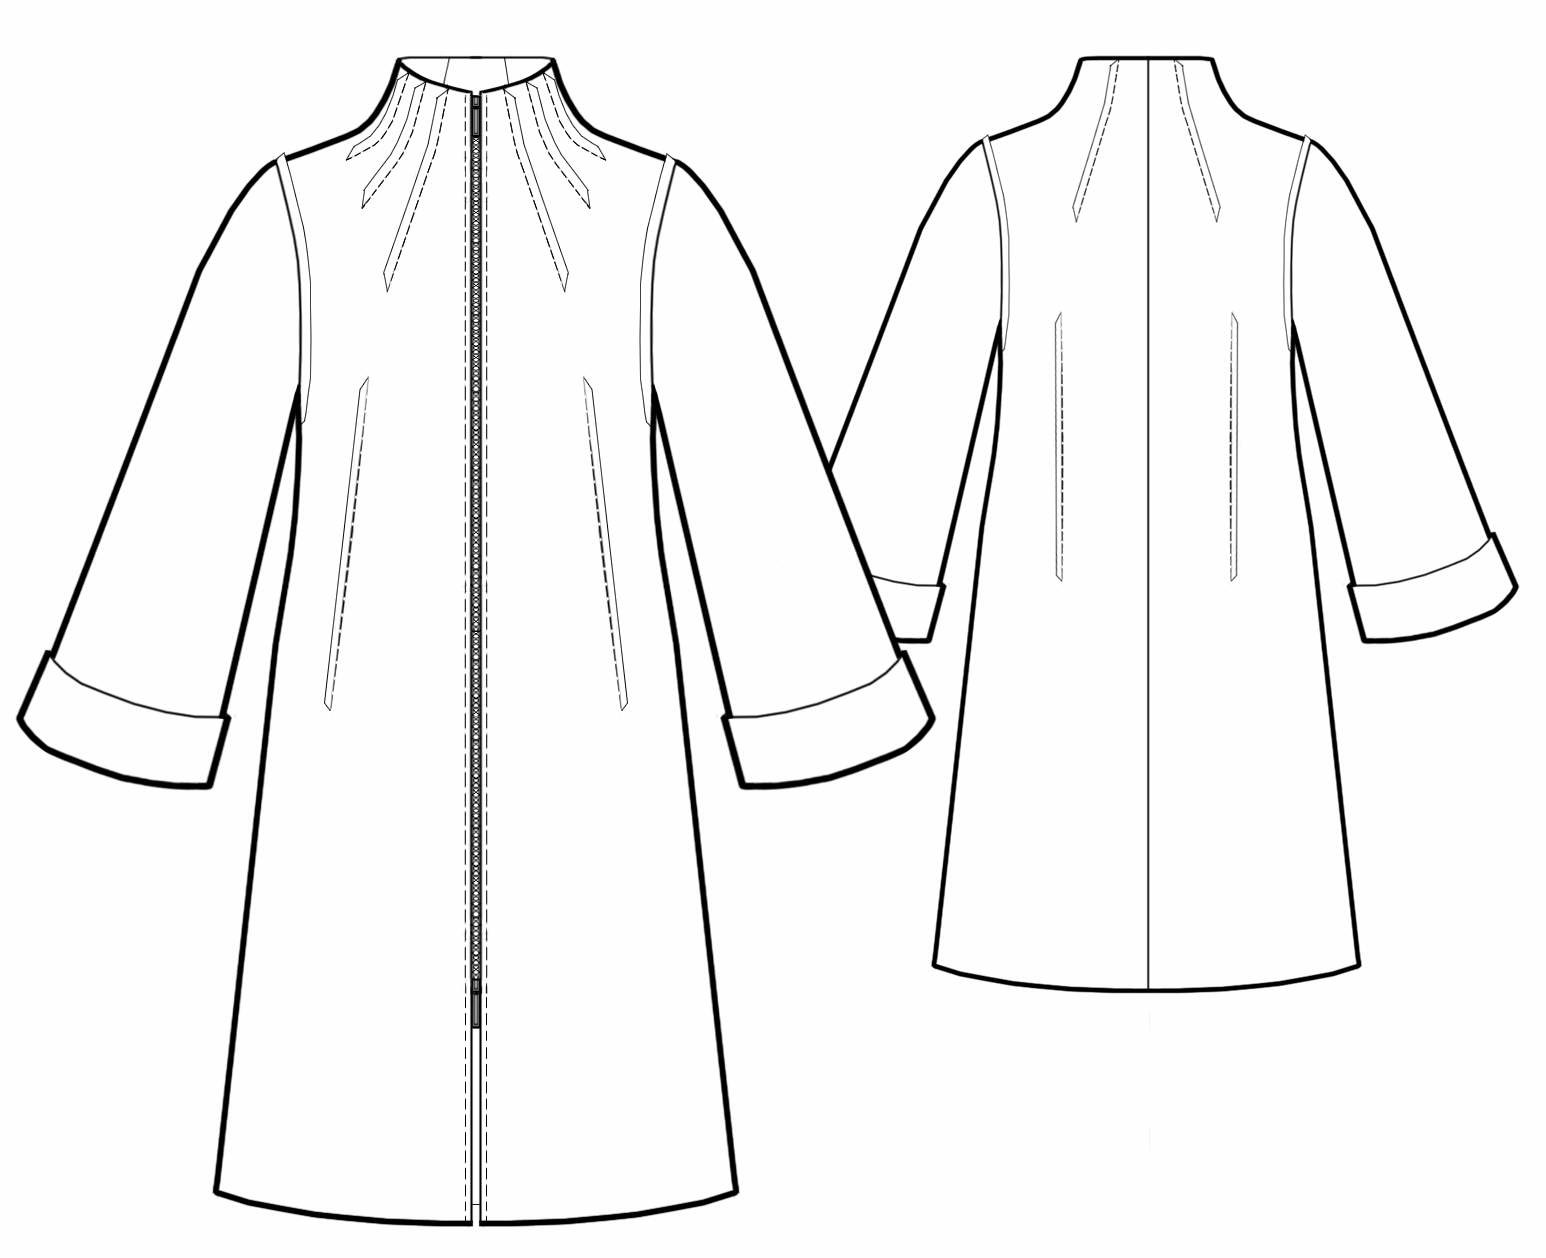 Raincoat With Stand-Up Collar - Sewing Pattern #5749. Made-to-measure ...